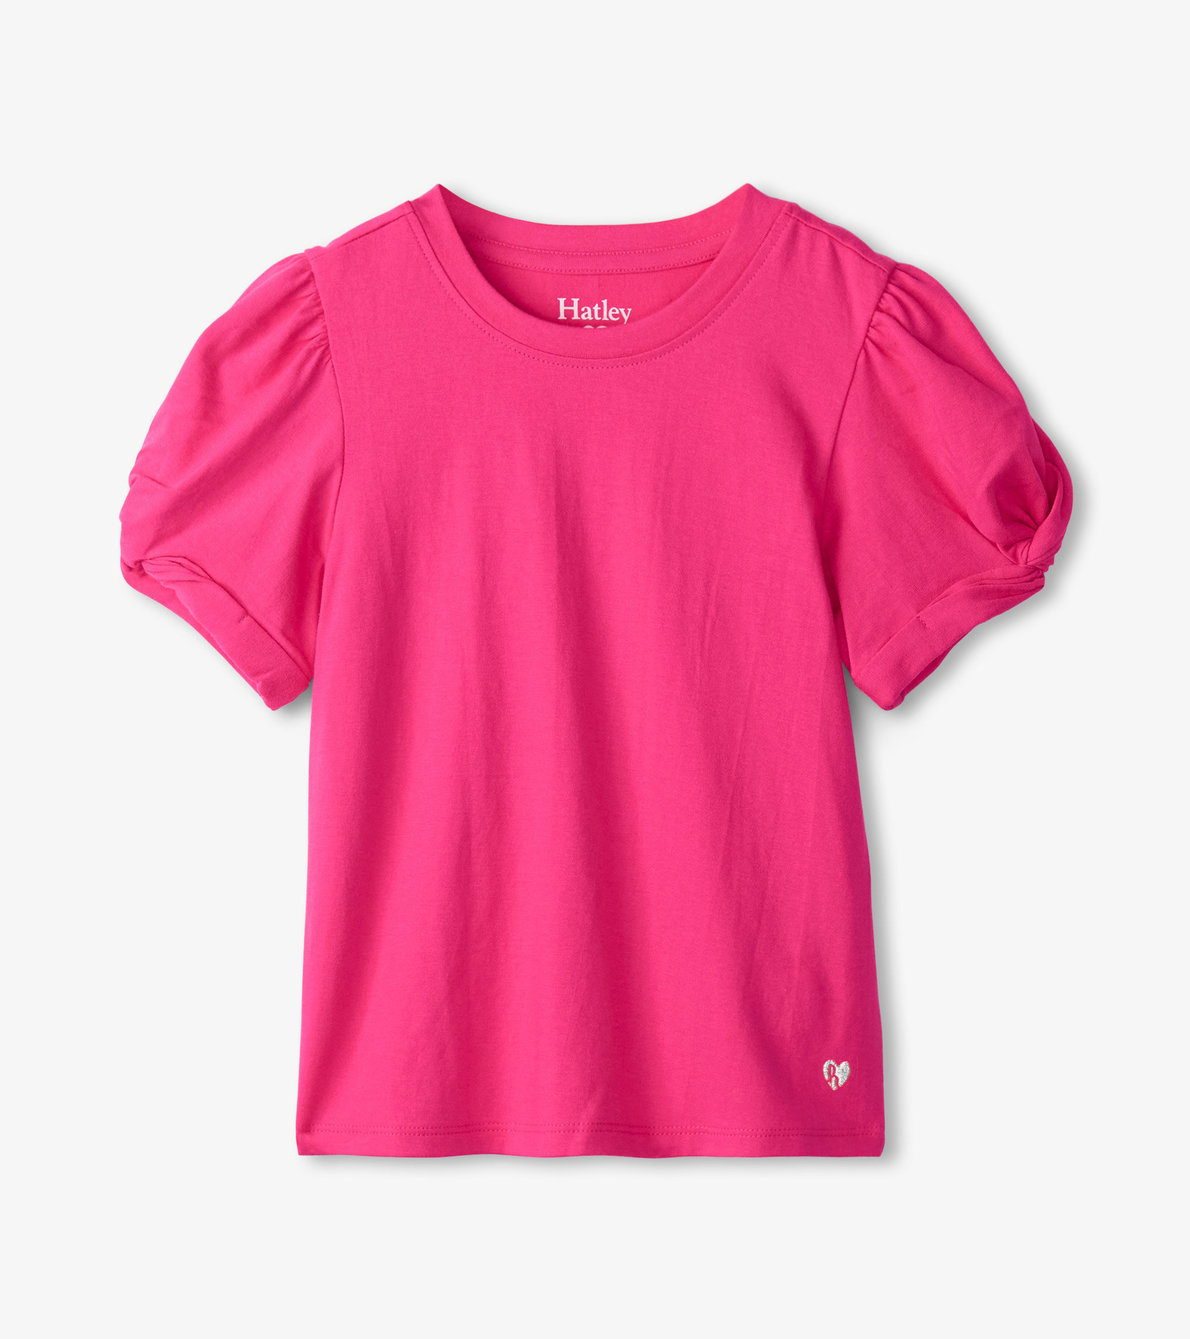 View larger image of Girls Pink Twisted Sleeve Tee